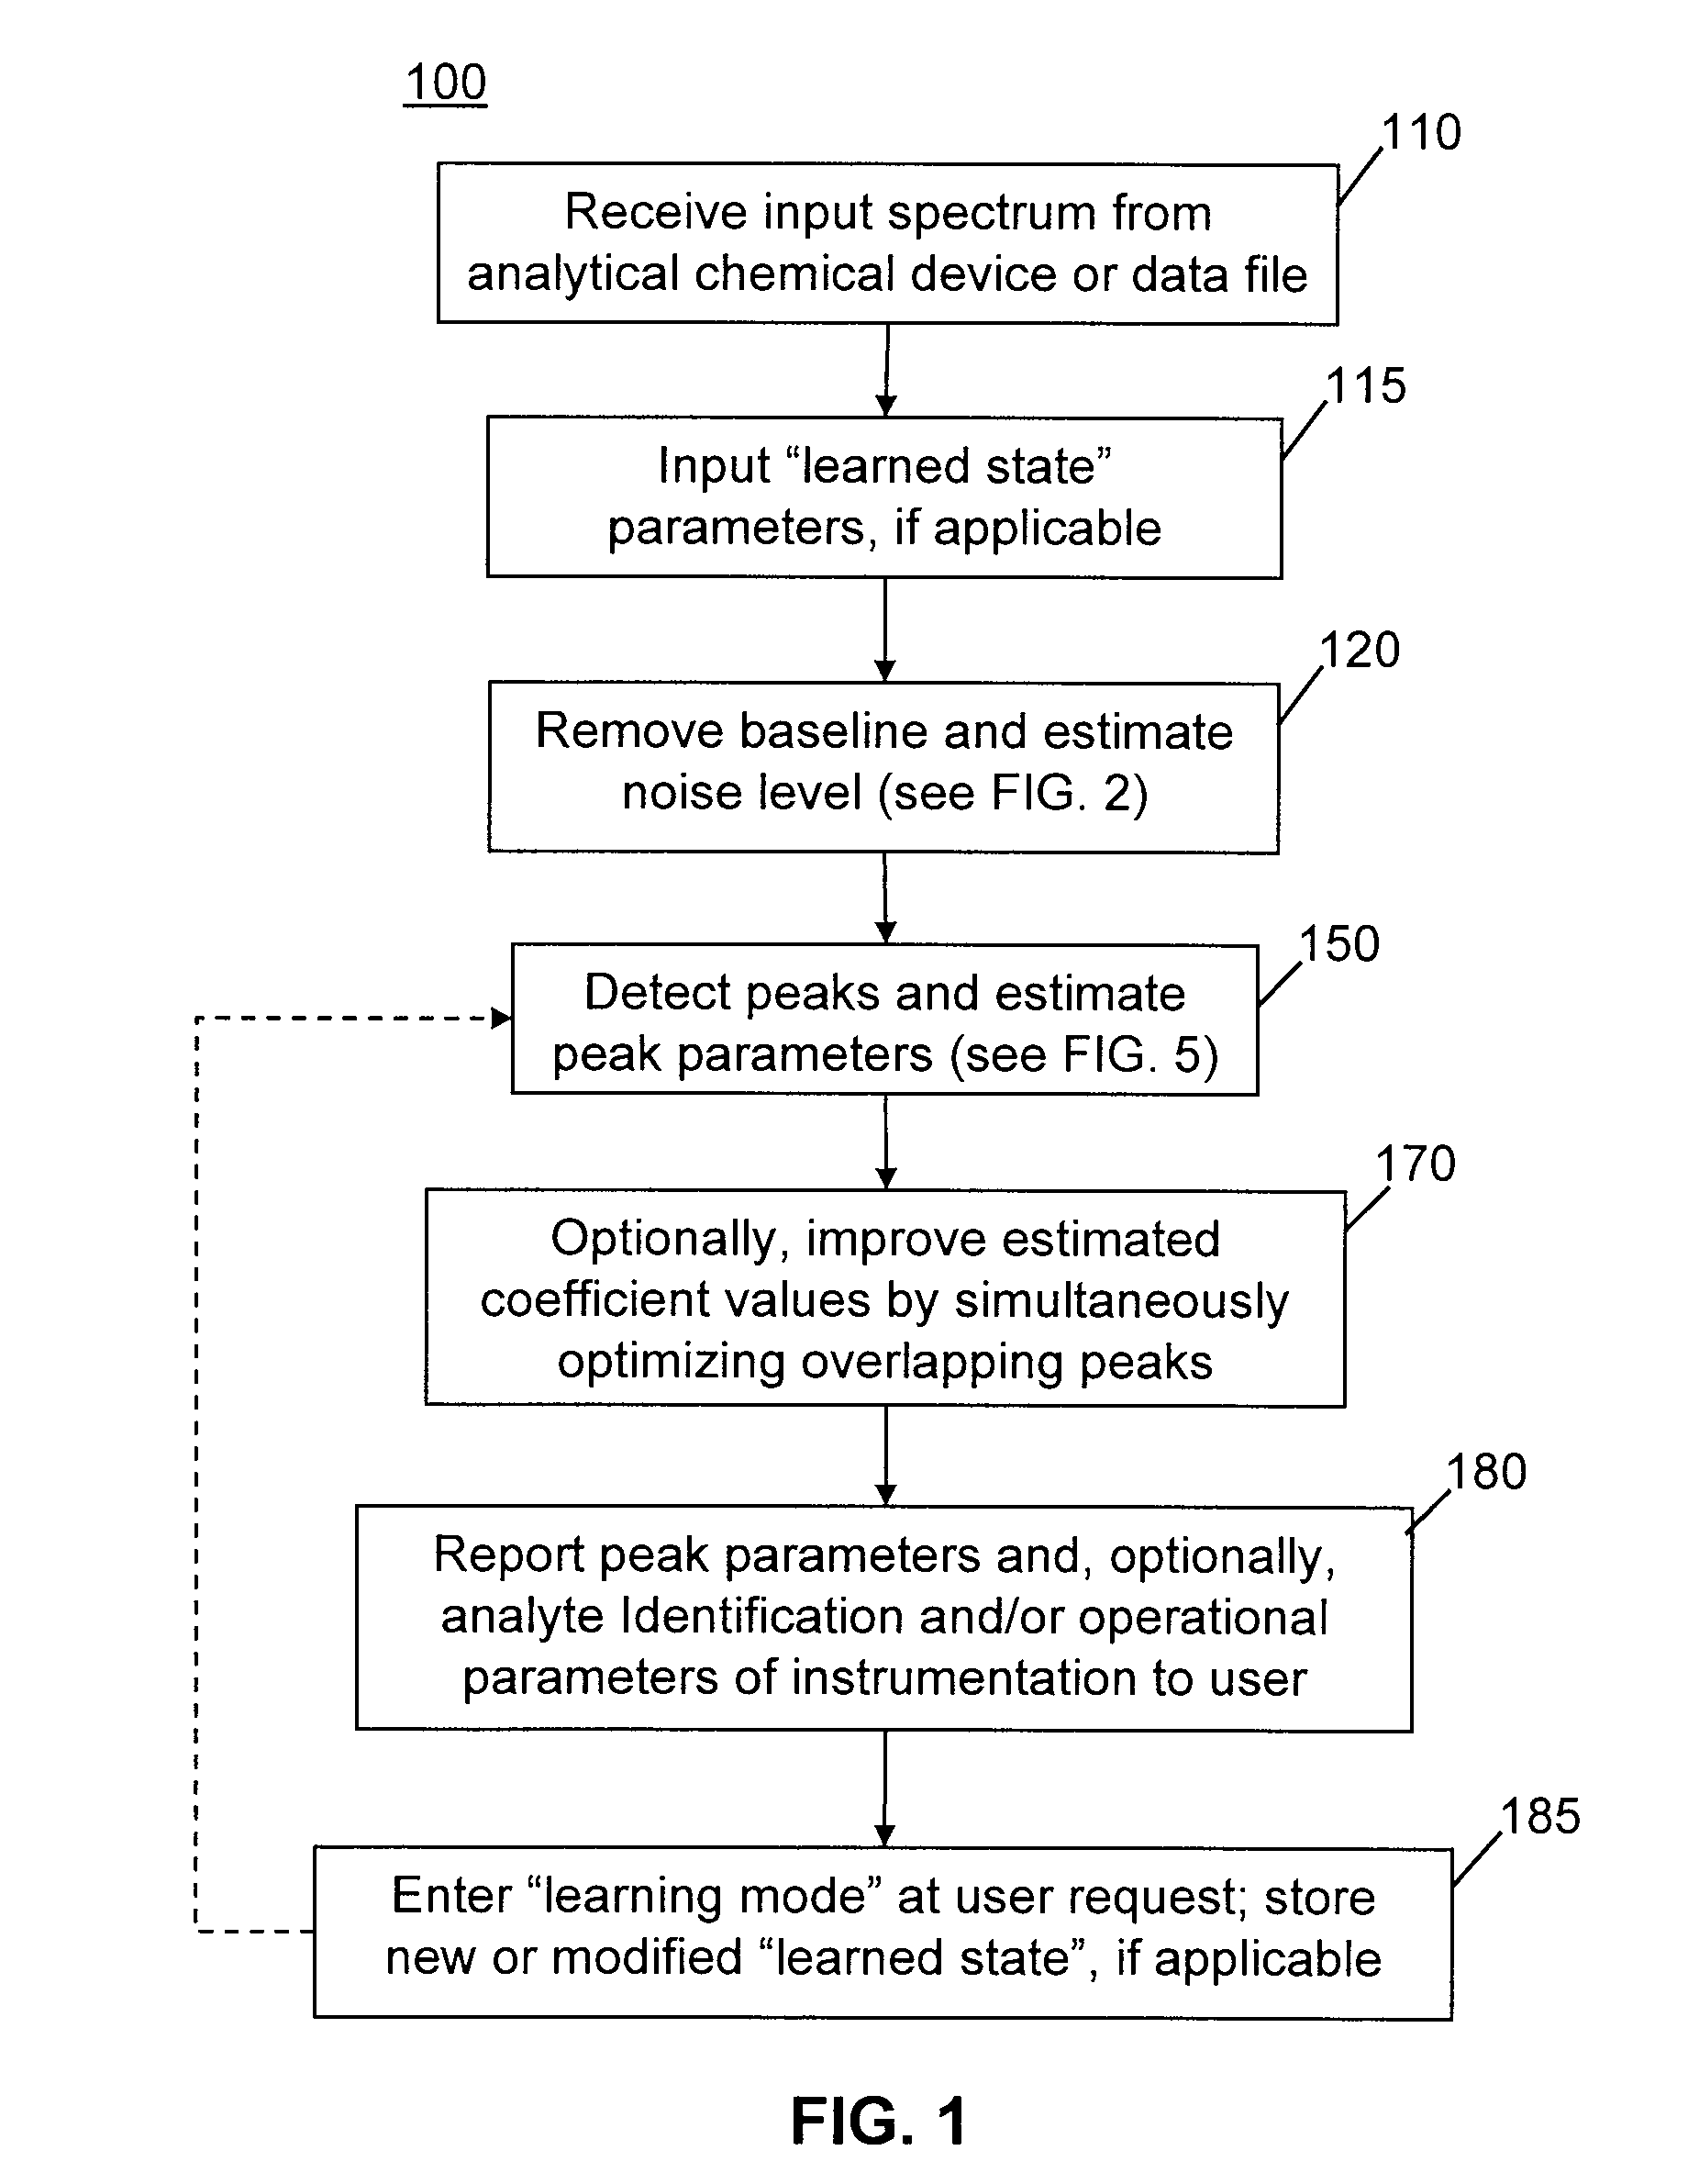 Methods of automated spectral peak detection and quantification having learning mode